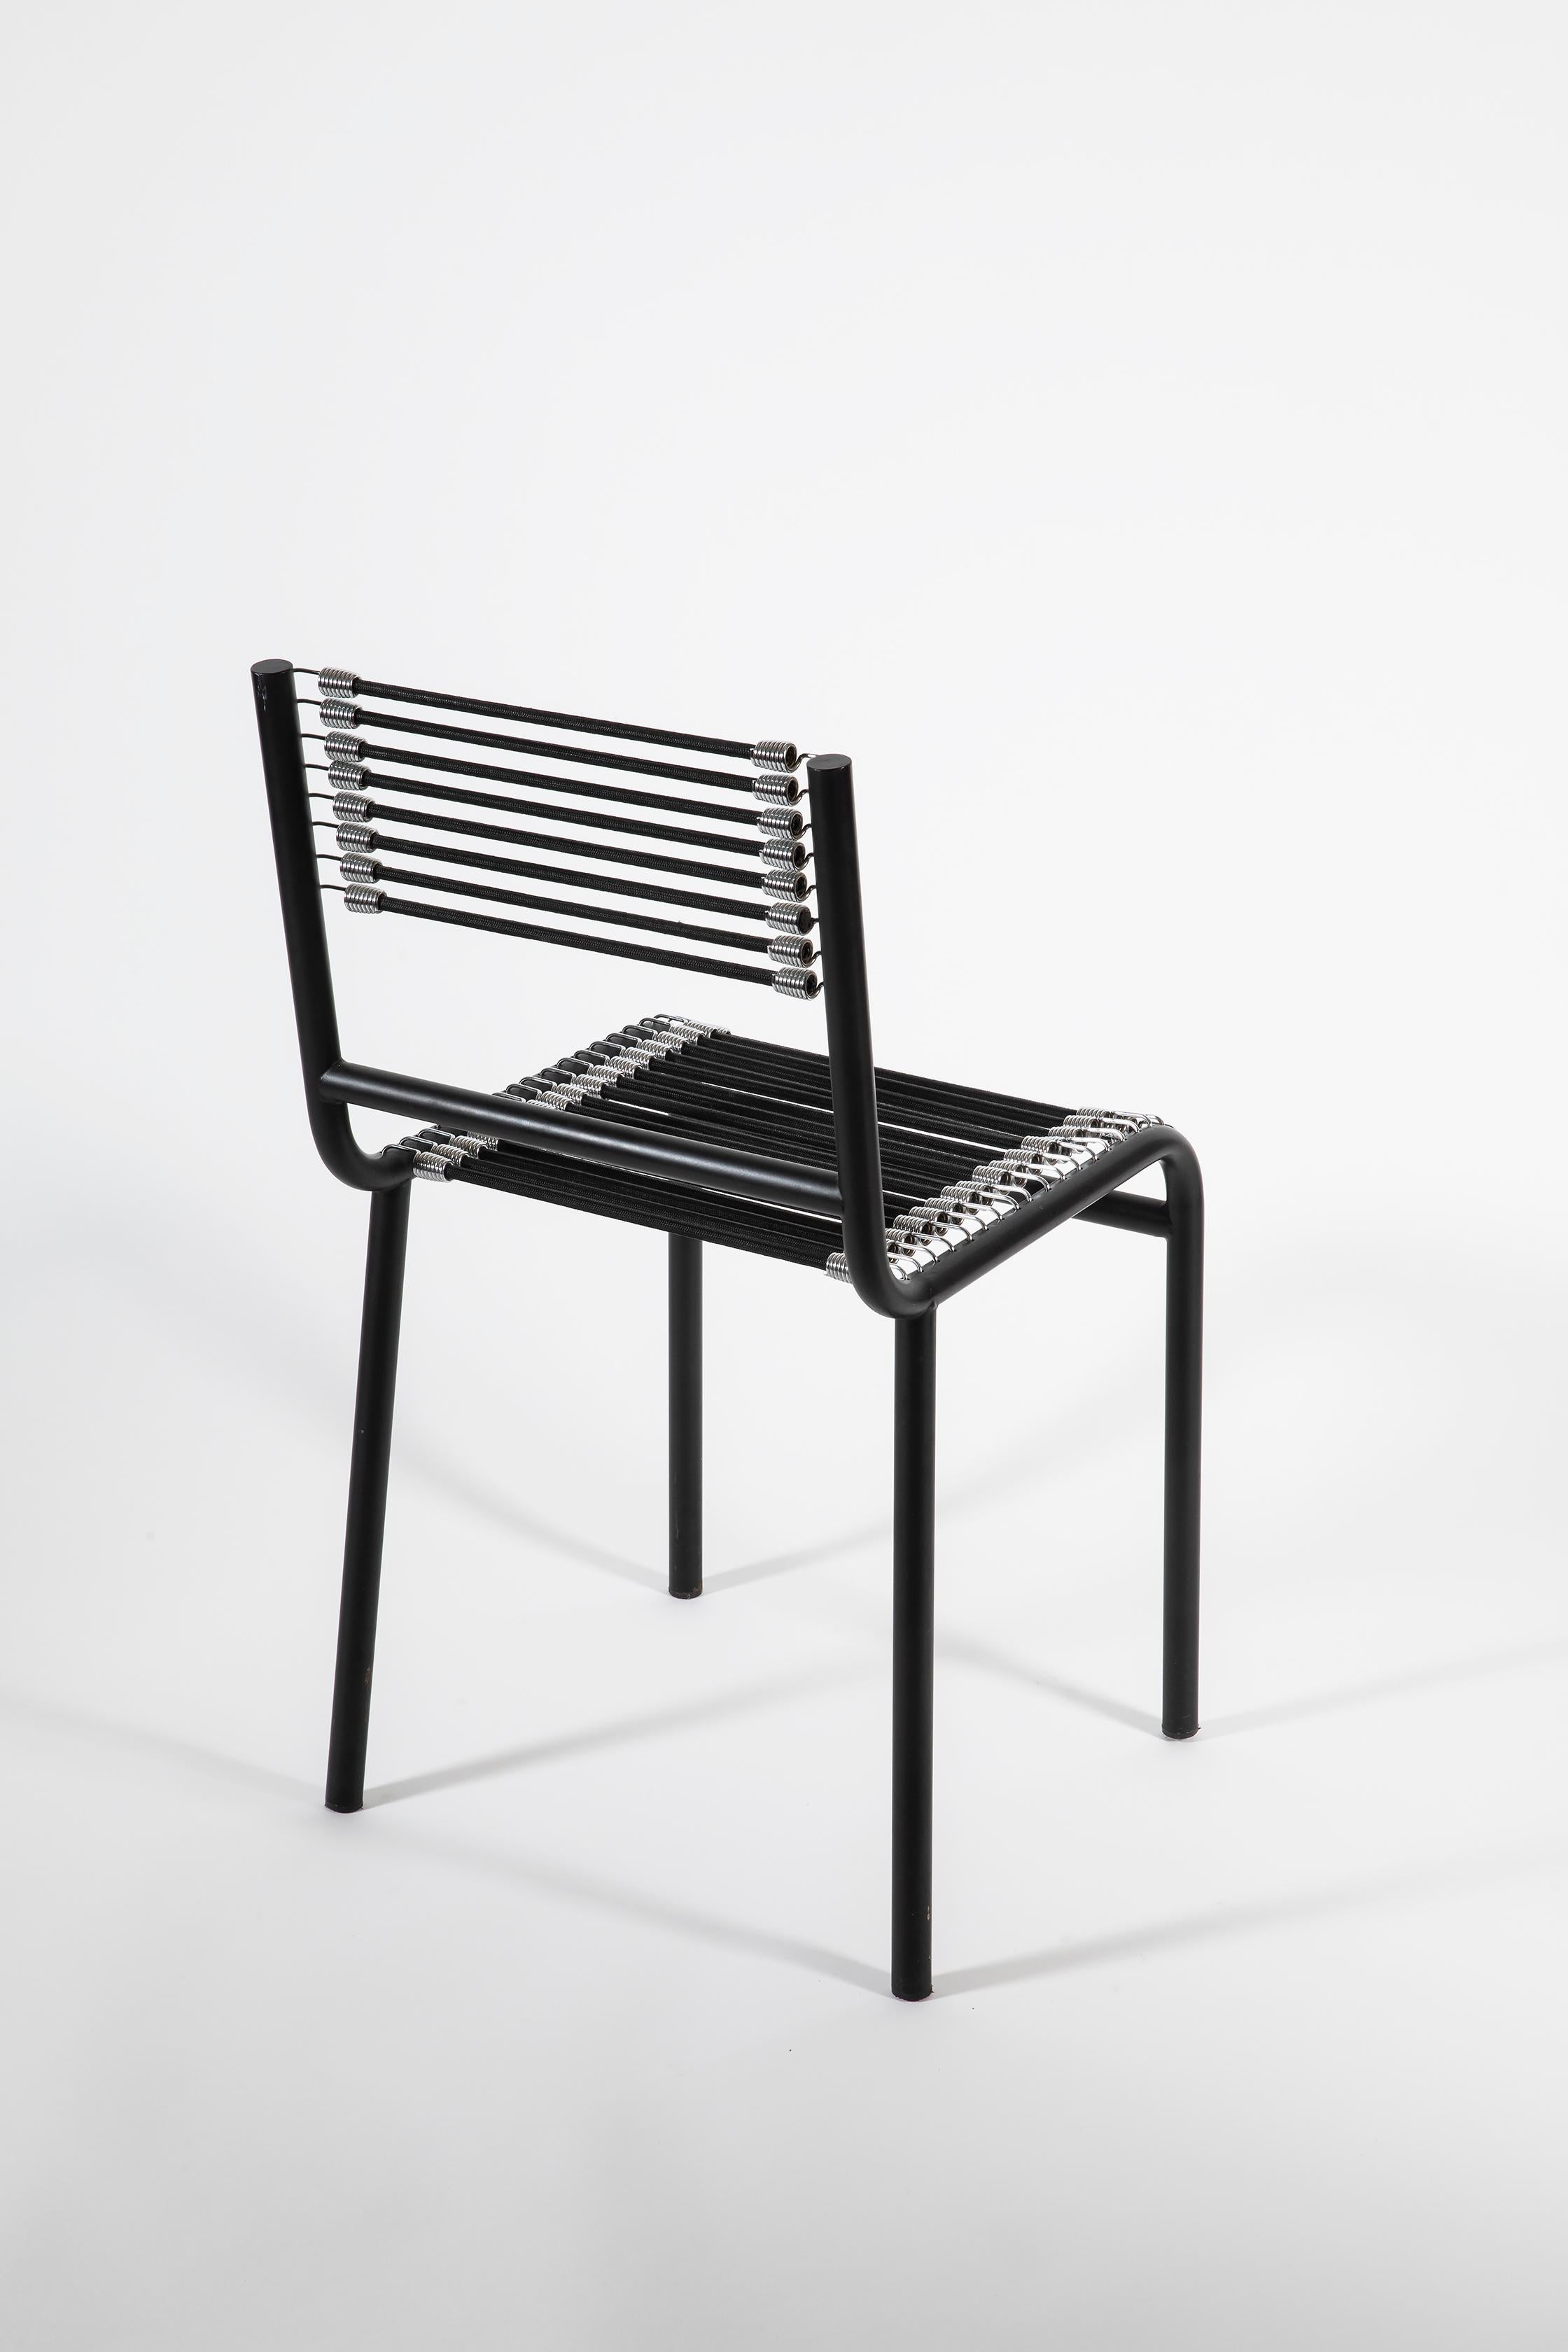 Italian René Herbst Set of Four Black Steel and Rubber Sandow Chairs for Pallucco, 1980s For Sale